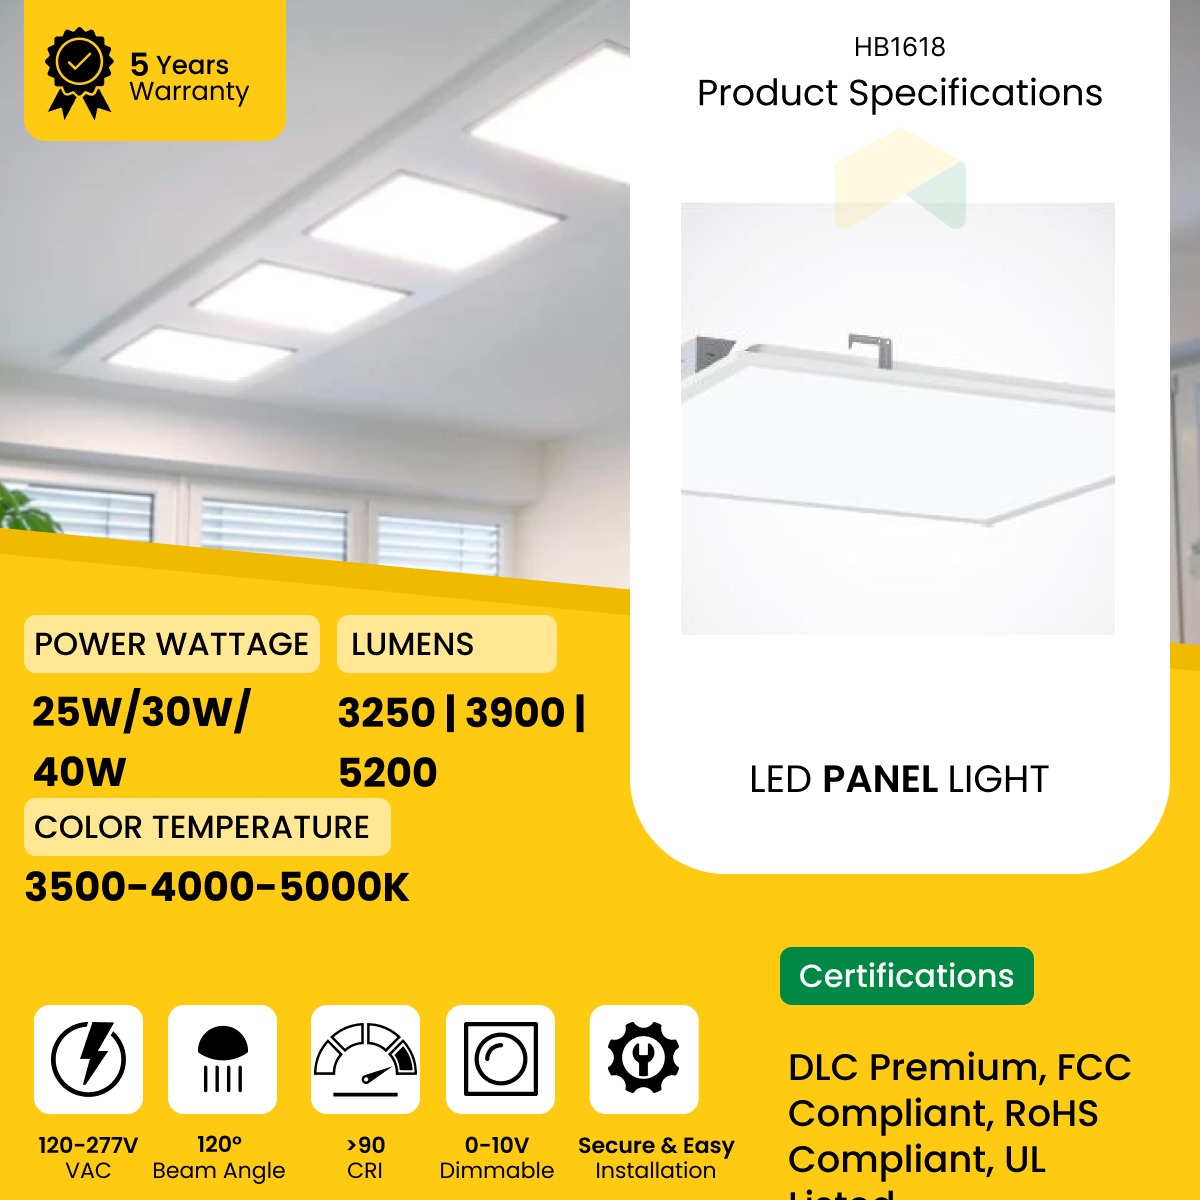 1x4 ft LED Backlite Panel - Wattage Adjustable (25W/30W/36W) - Color Changeable (3500K/4000K/5000K) - 120-277VAC - 0-10V Dimmable - UL, DLC Premium Listed - 5 Years Warranty (2-Pack)